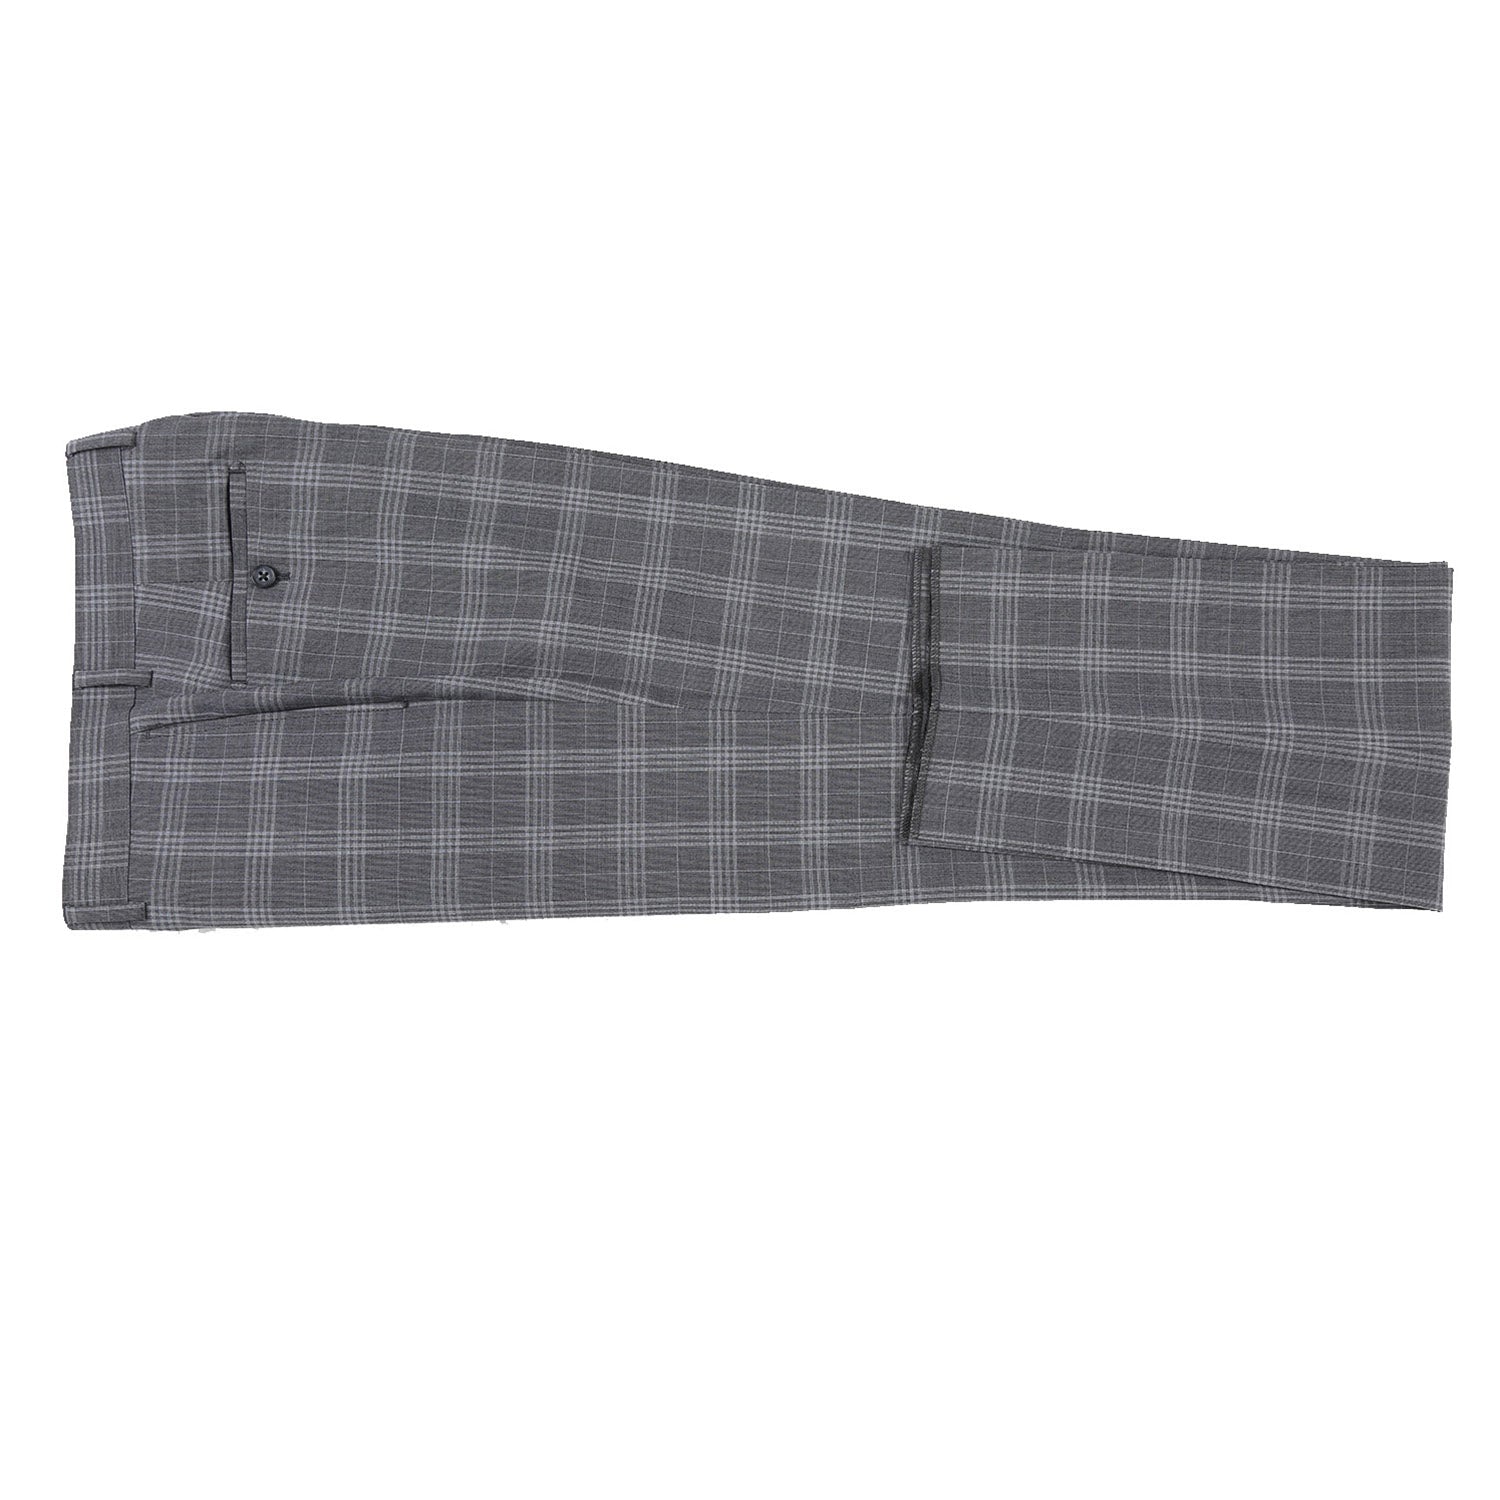 Wool Stretch Double Breasted SLIM FIT Suit in Grey Check (Short, Regular, and Long Available) by English Laundry